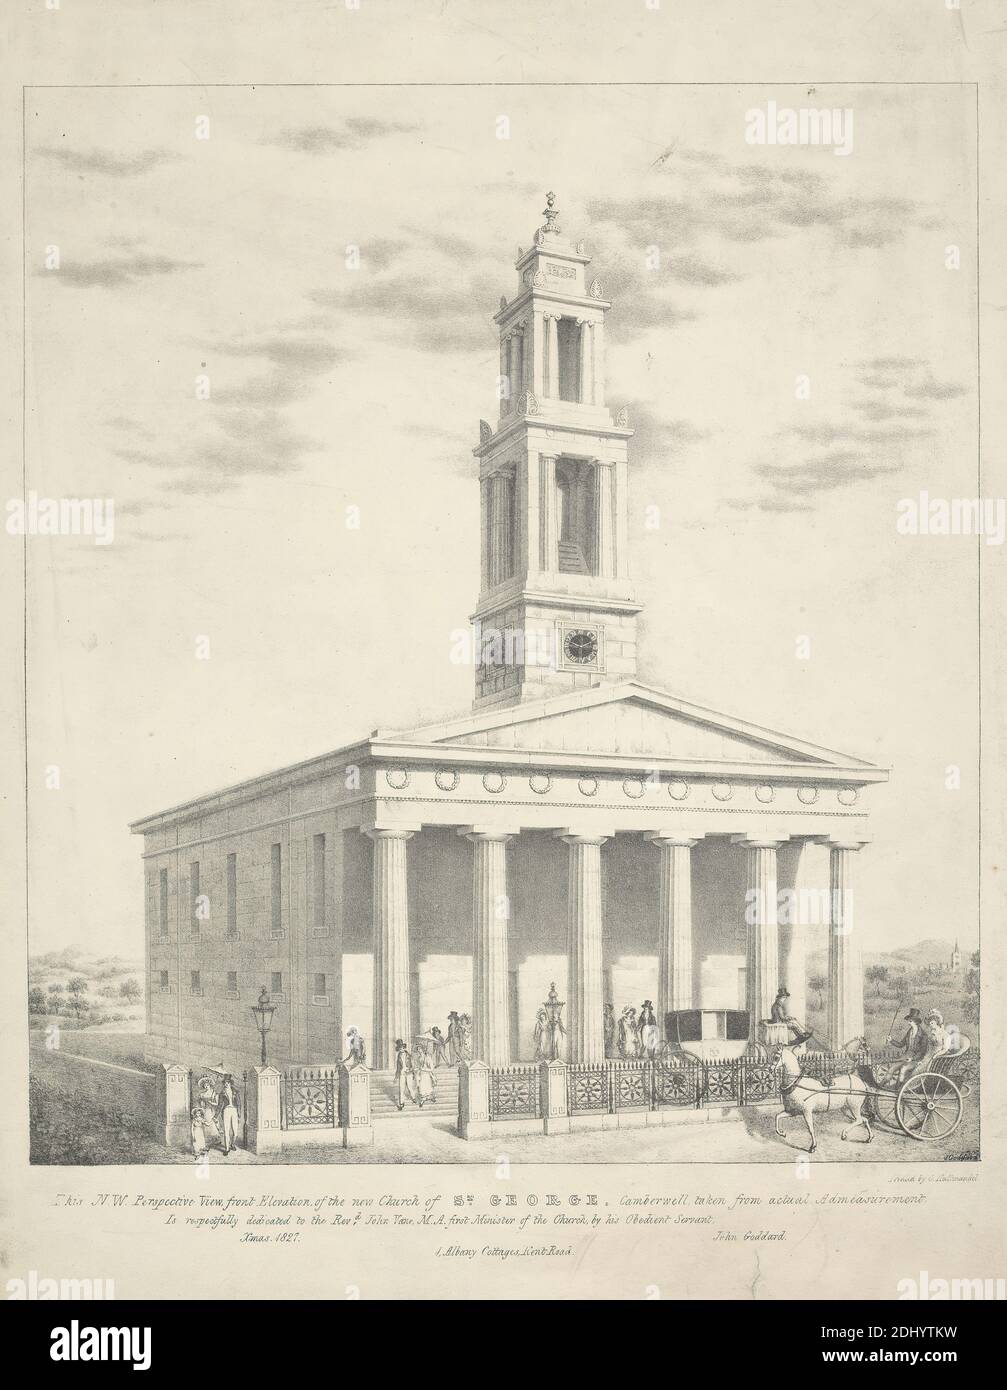 This Northwest Perspective View front Elevation of the New Church of St. George, Camberwell..., John Goddard, active 1811–1842, after John Goddard, active 1811–1842, 1827, Lithograph, Sheet: 16 1/2 x 12 7/8in. (41.9 x 32.7cm Stock Photo